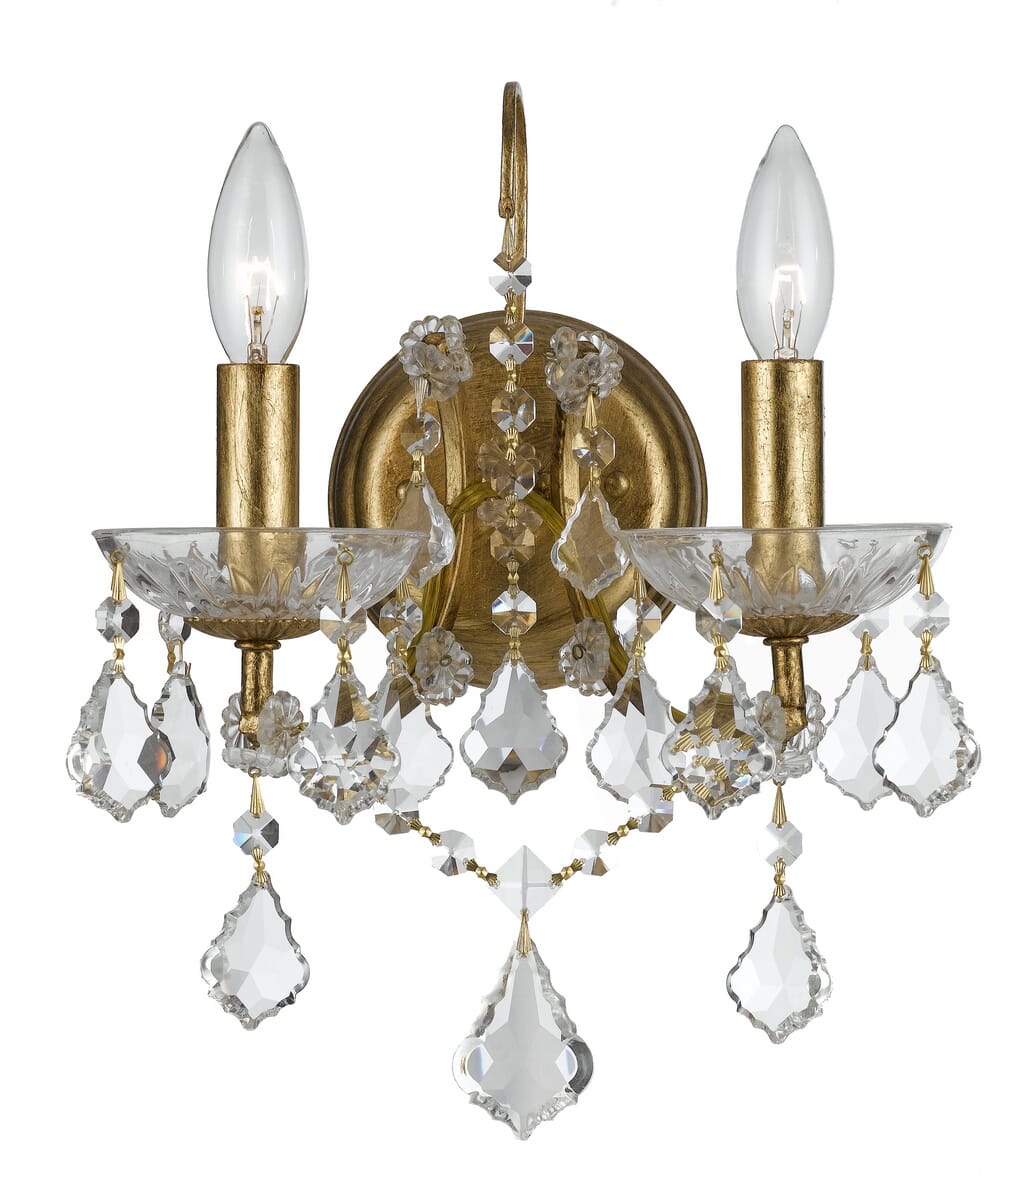 Filmore 2-Light 13"" Wall Sconce in Antique Gold with Clear Swarovski Strass Crystals -  Crystorama, 4452-GA-CL-S